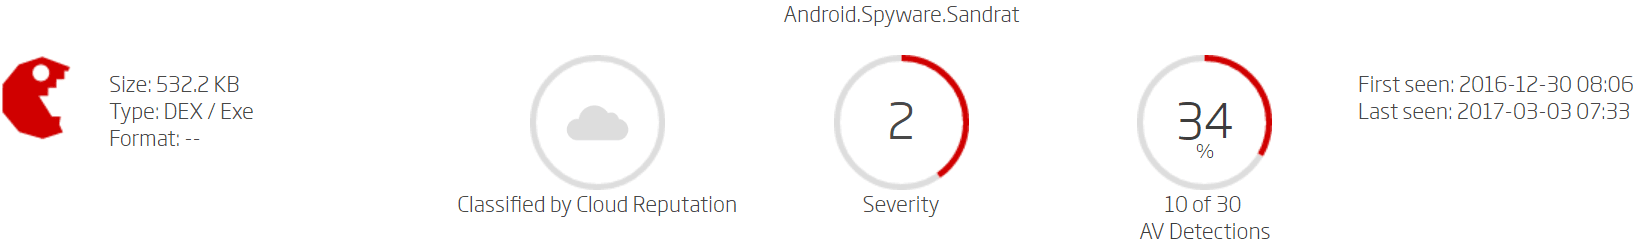 malicious-android-apps-3.png